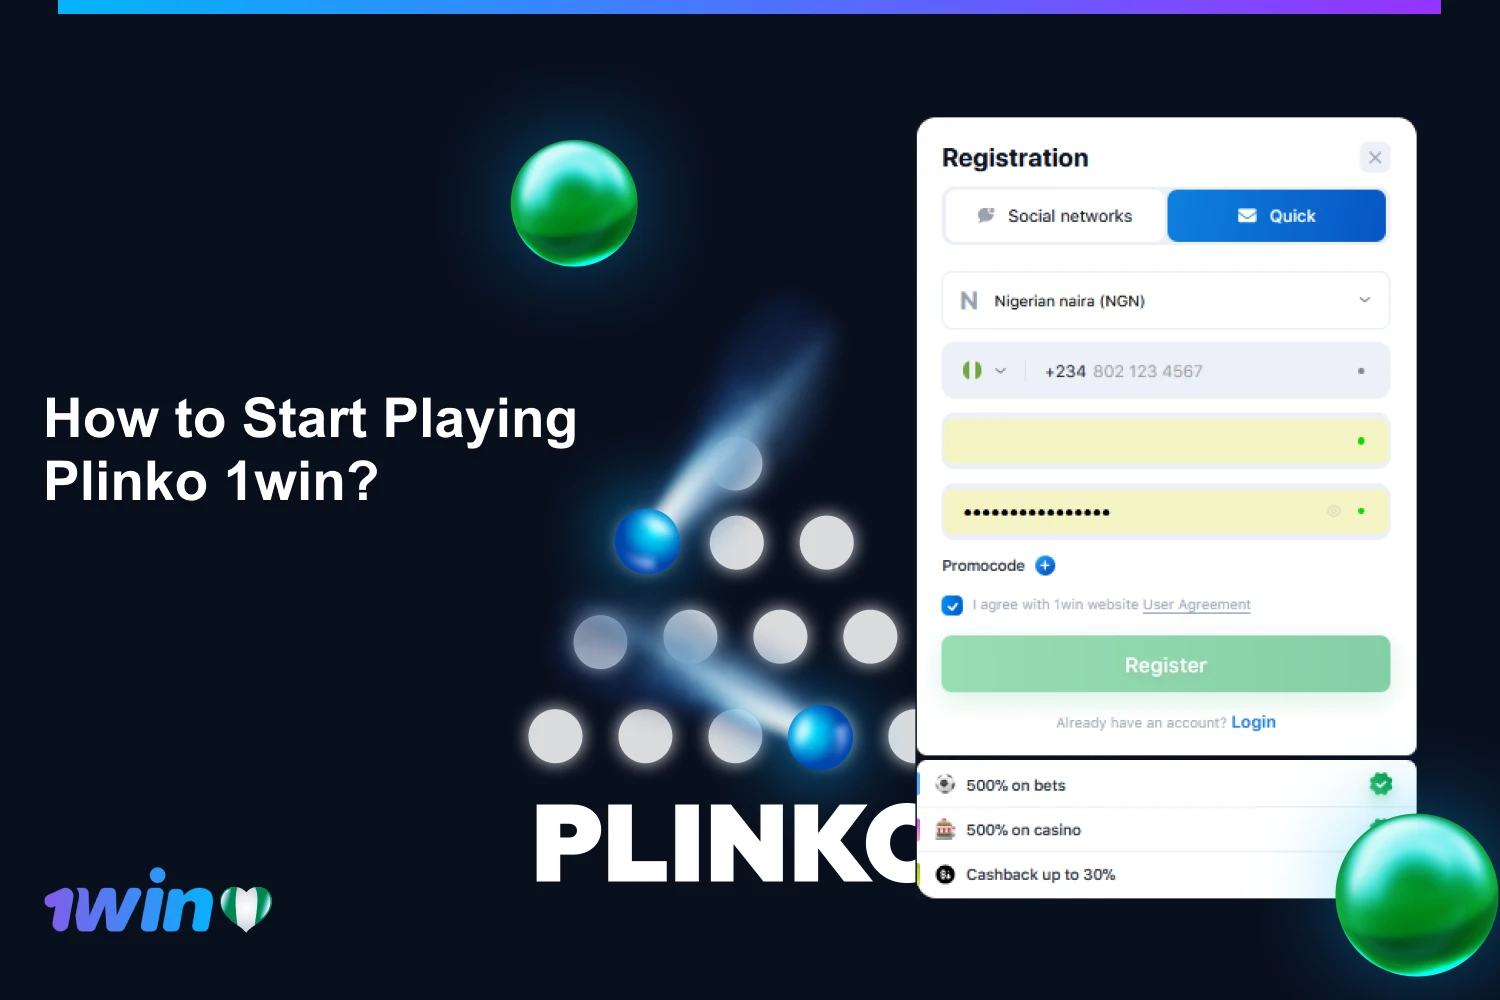 Every Nigerian player who wants to play at 1win Plinko must register and make a deposit